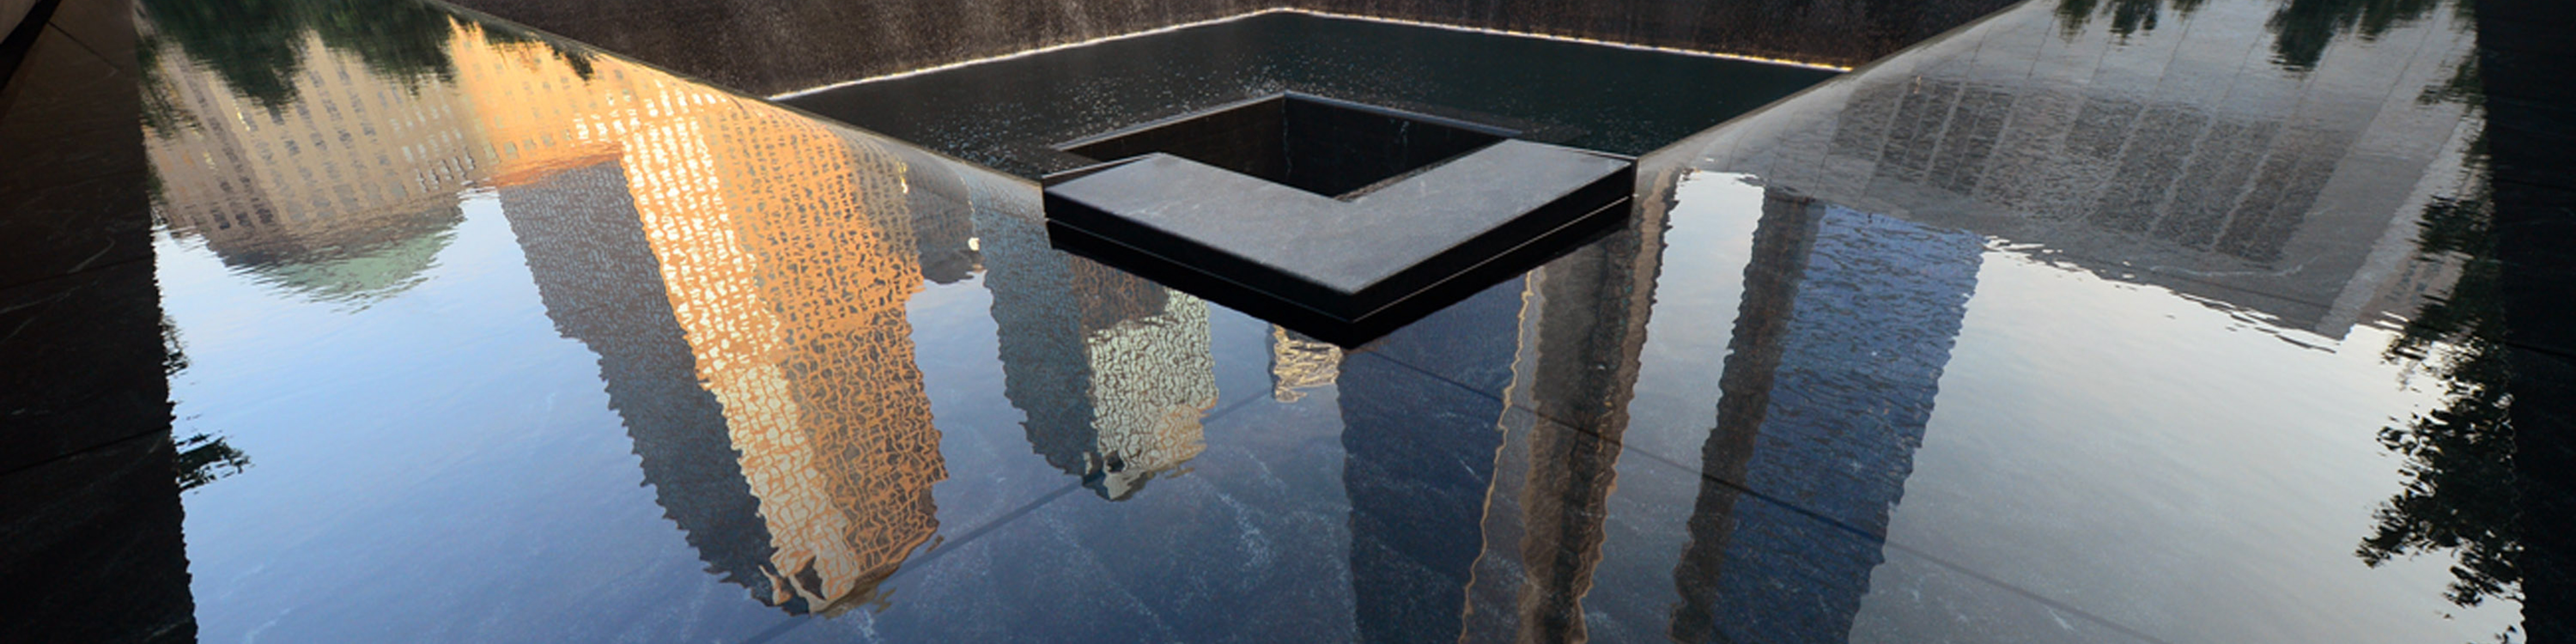 Building are reflected in one of the pools of the 9/11 Memorial during ceremonies for the twelfth anniversary of the terrorist attacks on lower Manhattan at the World Trade Center site on September 11, 2013 in New York City